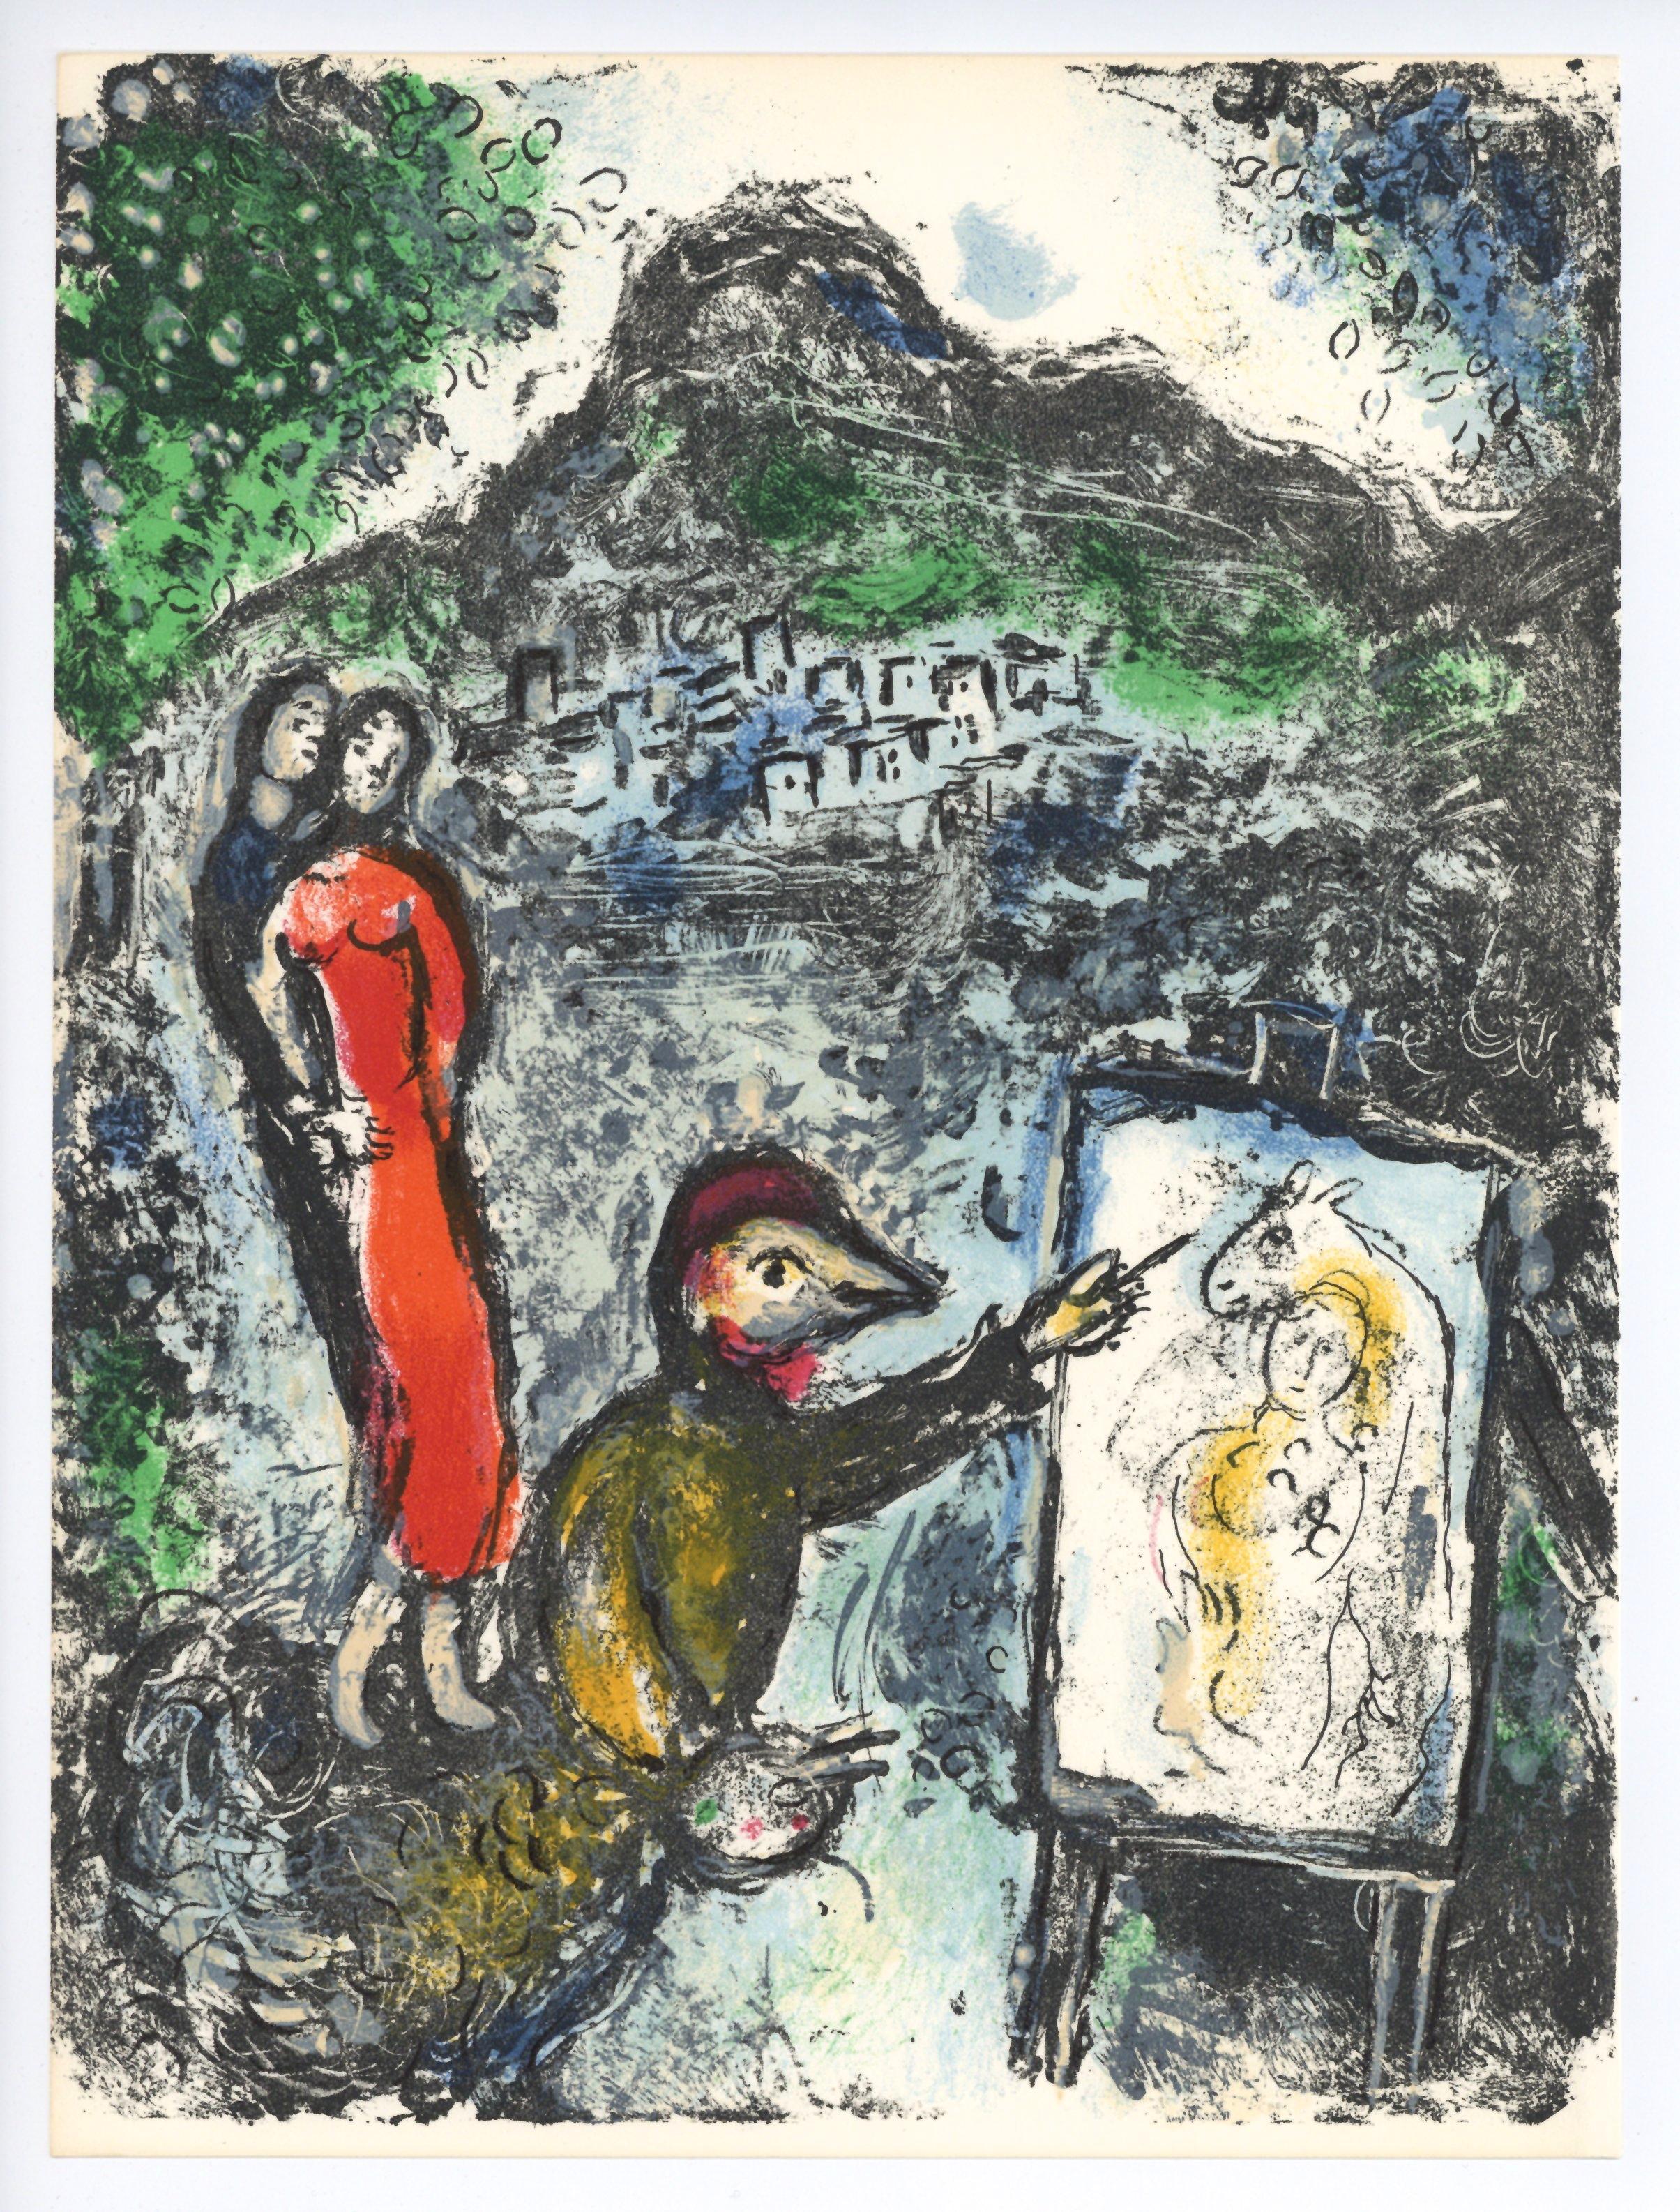 What materials did Marc Chagall use?